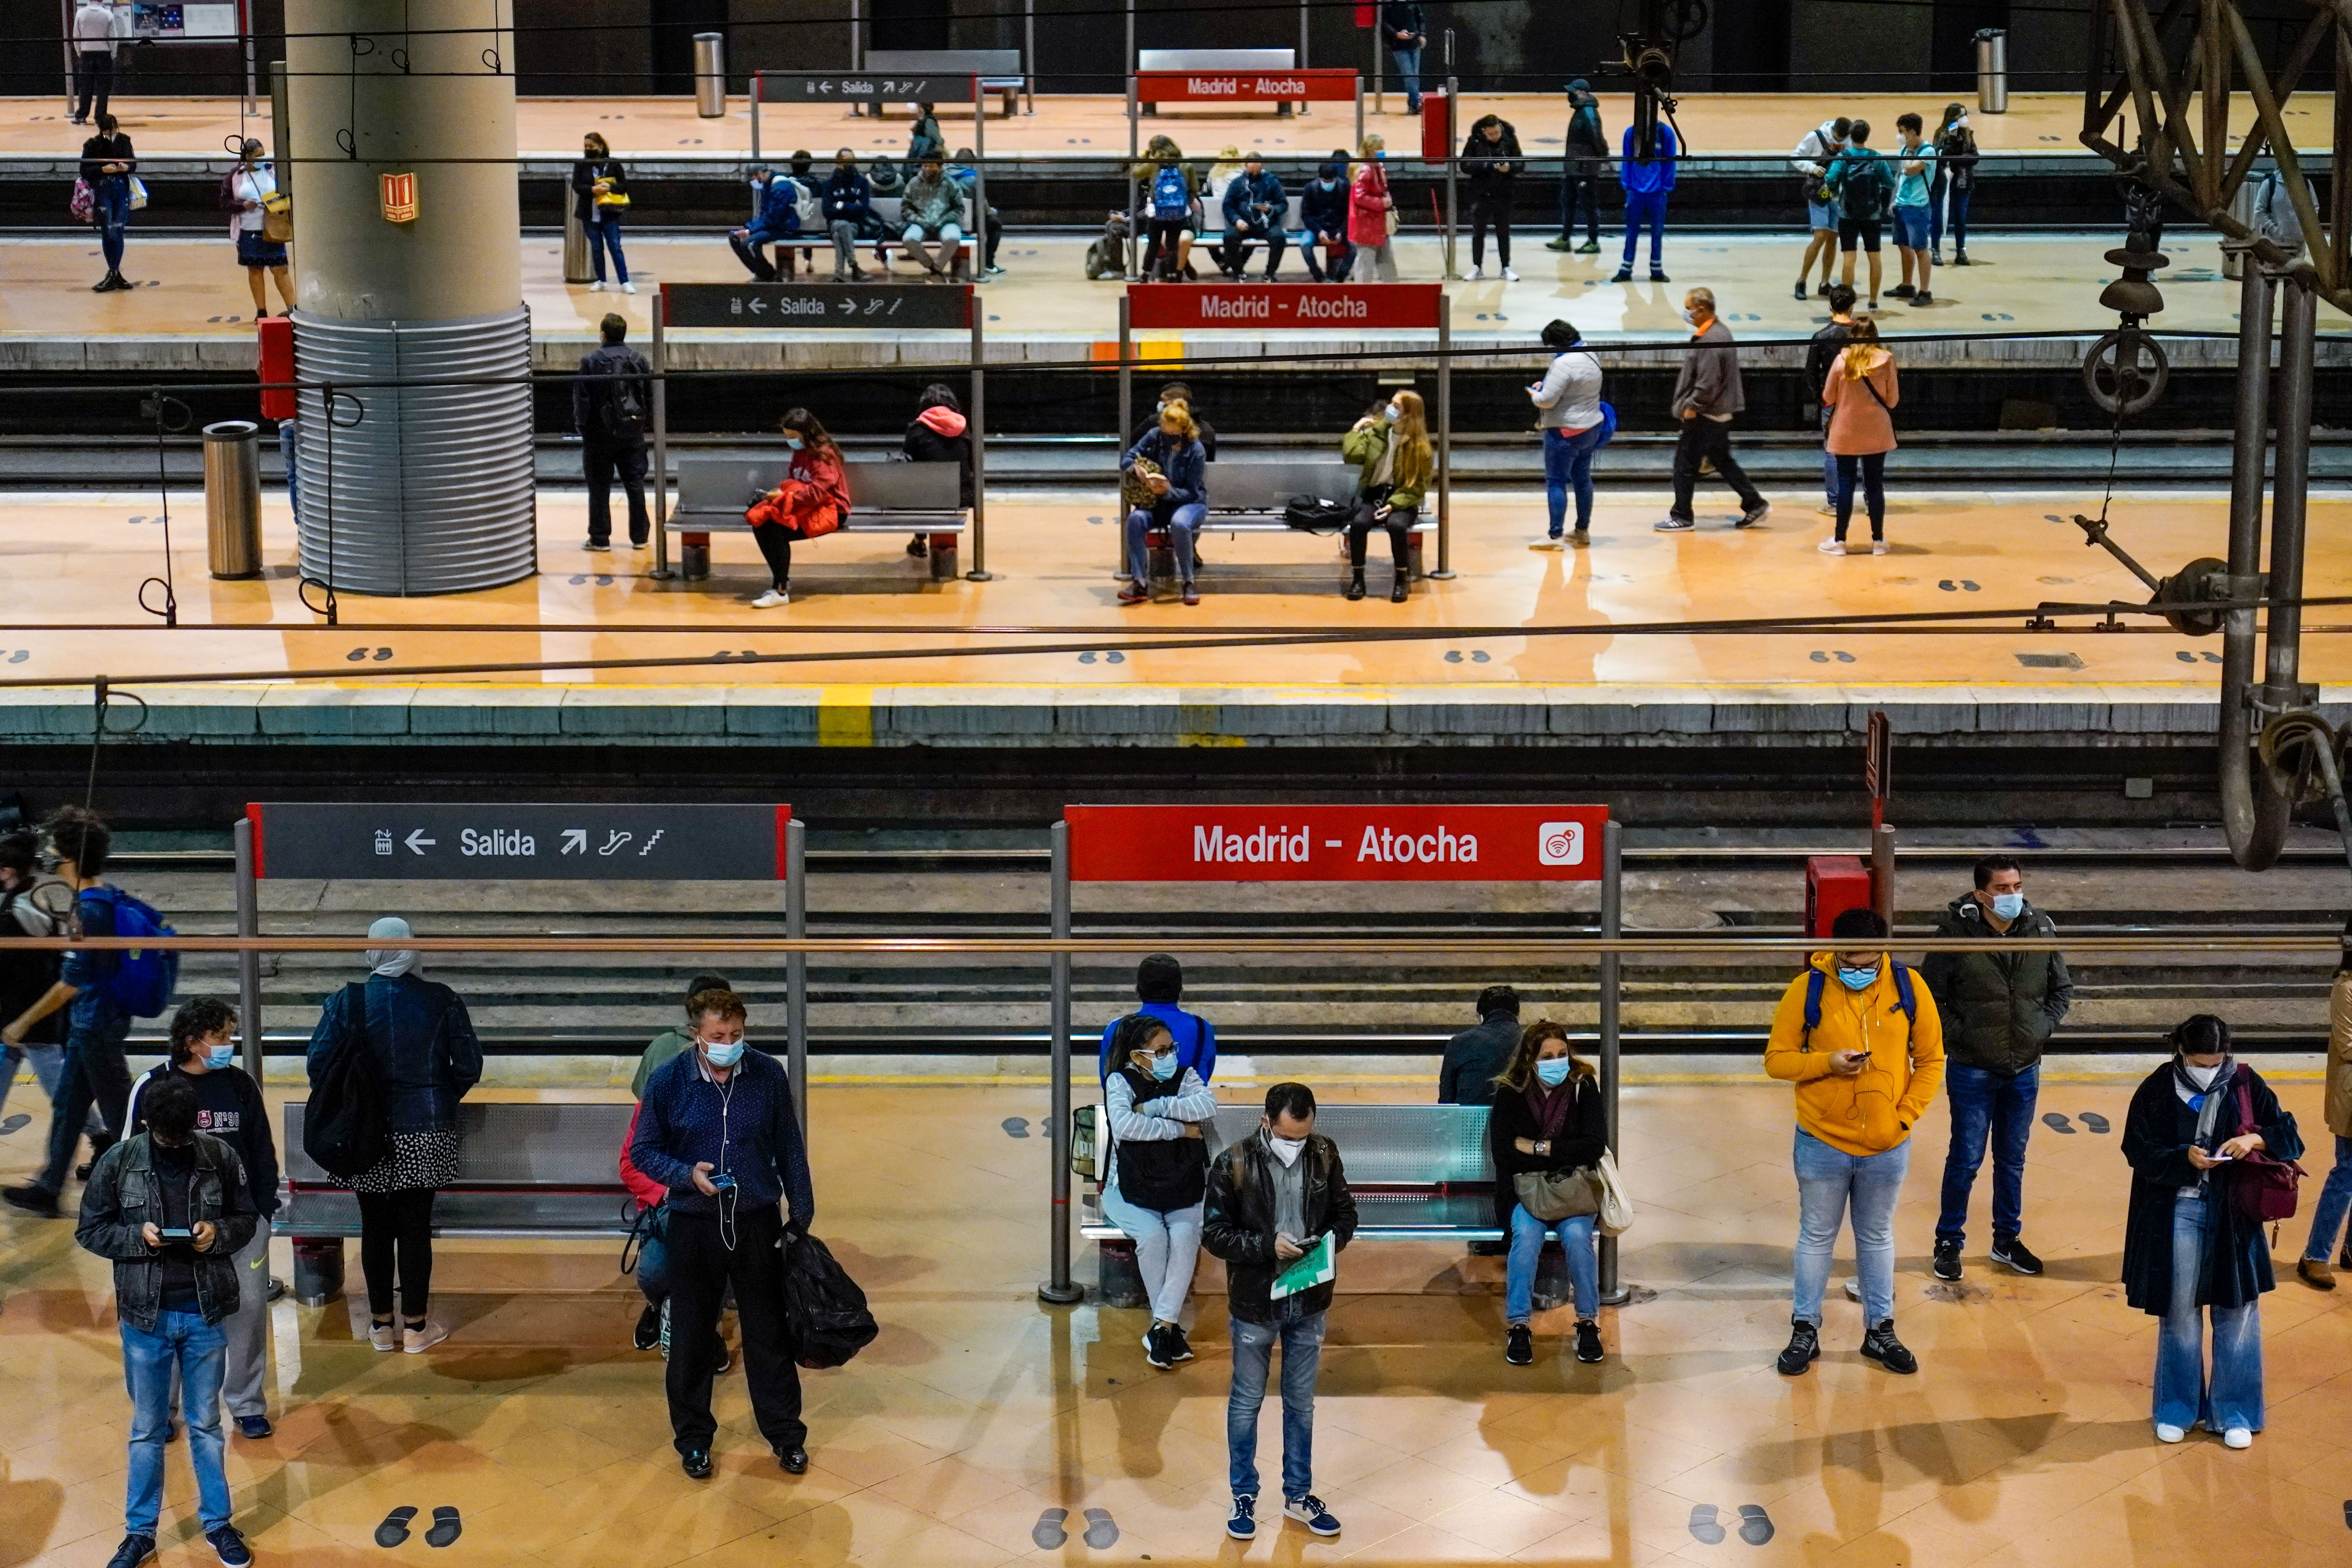 People wait for trains at Atocha railway station in Madrid on October 2.